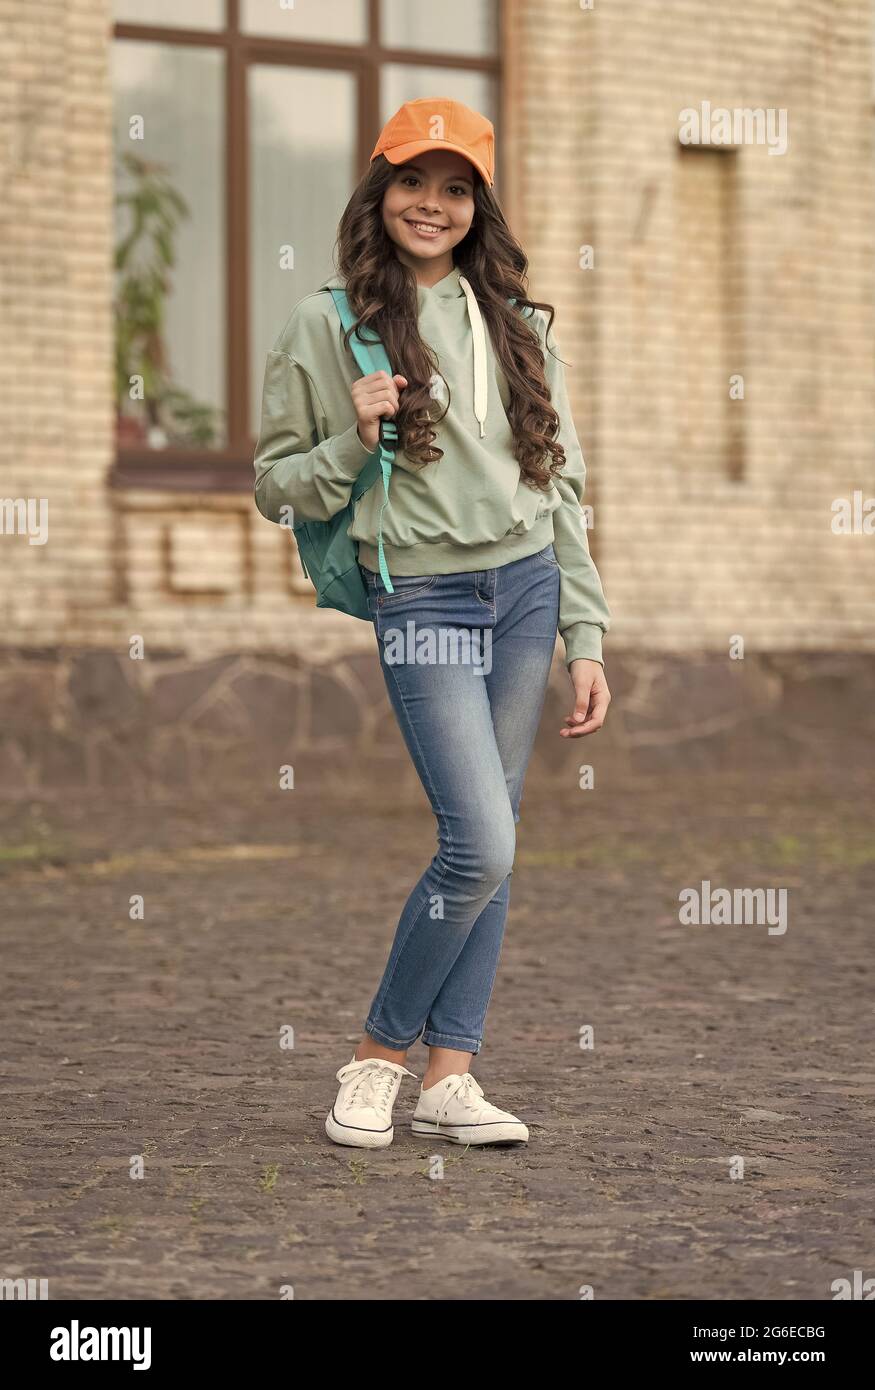 https://c8.alamy.com/comp/2G6ECBG/fashionable-little-girl-smile-with-fashion-look-wearing-trendy-clothes-on-urban-outdoors-casual-2G6ECBG.jpg